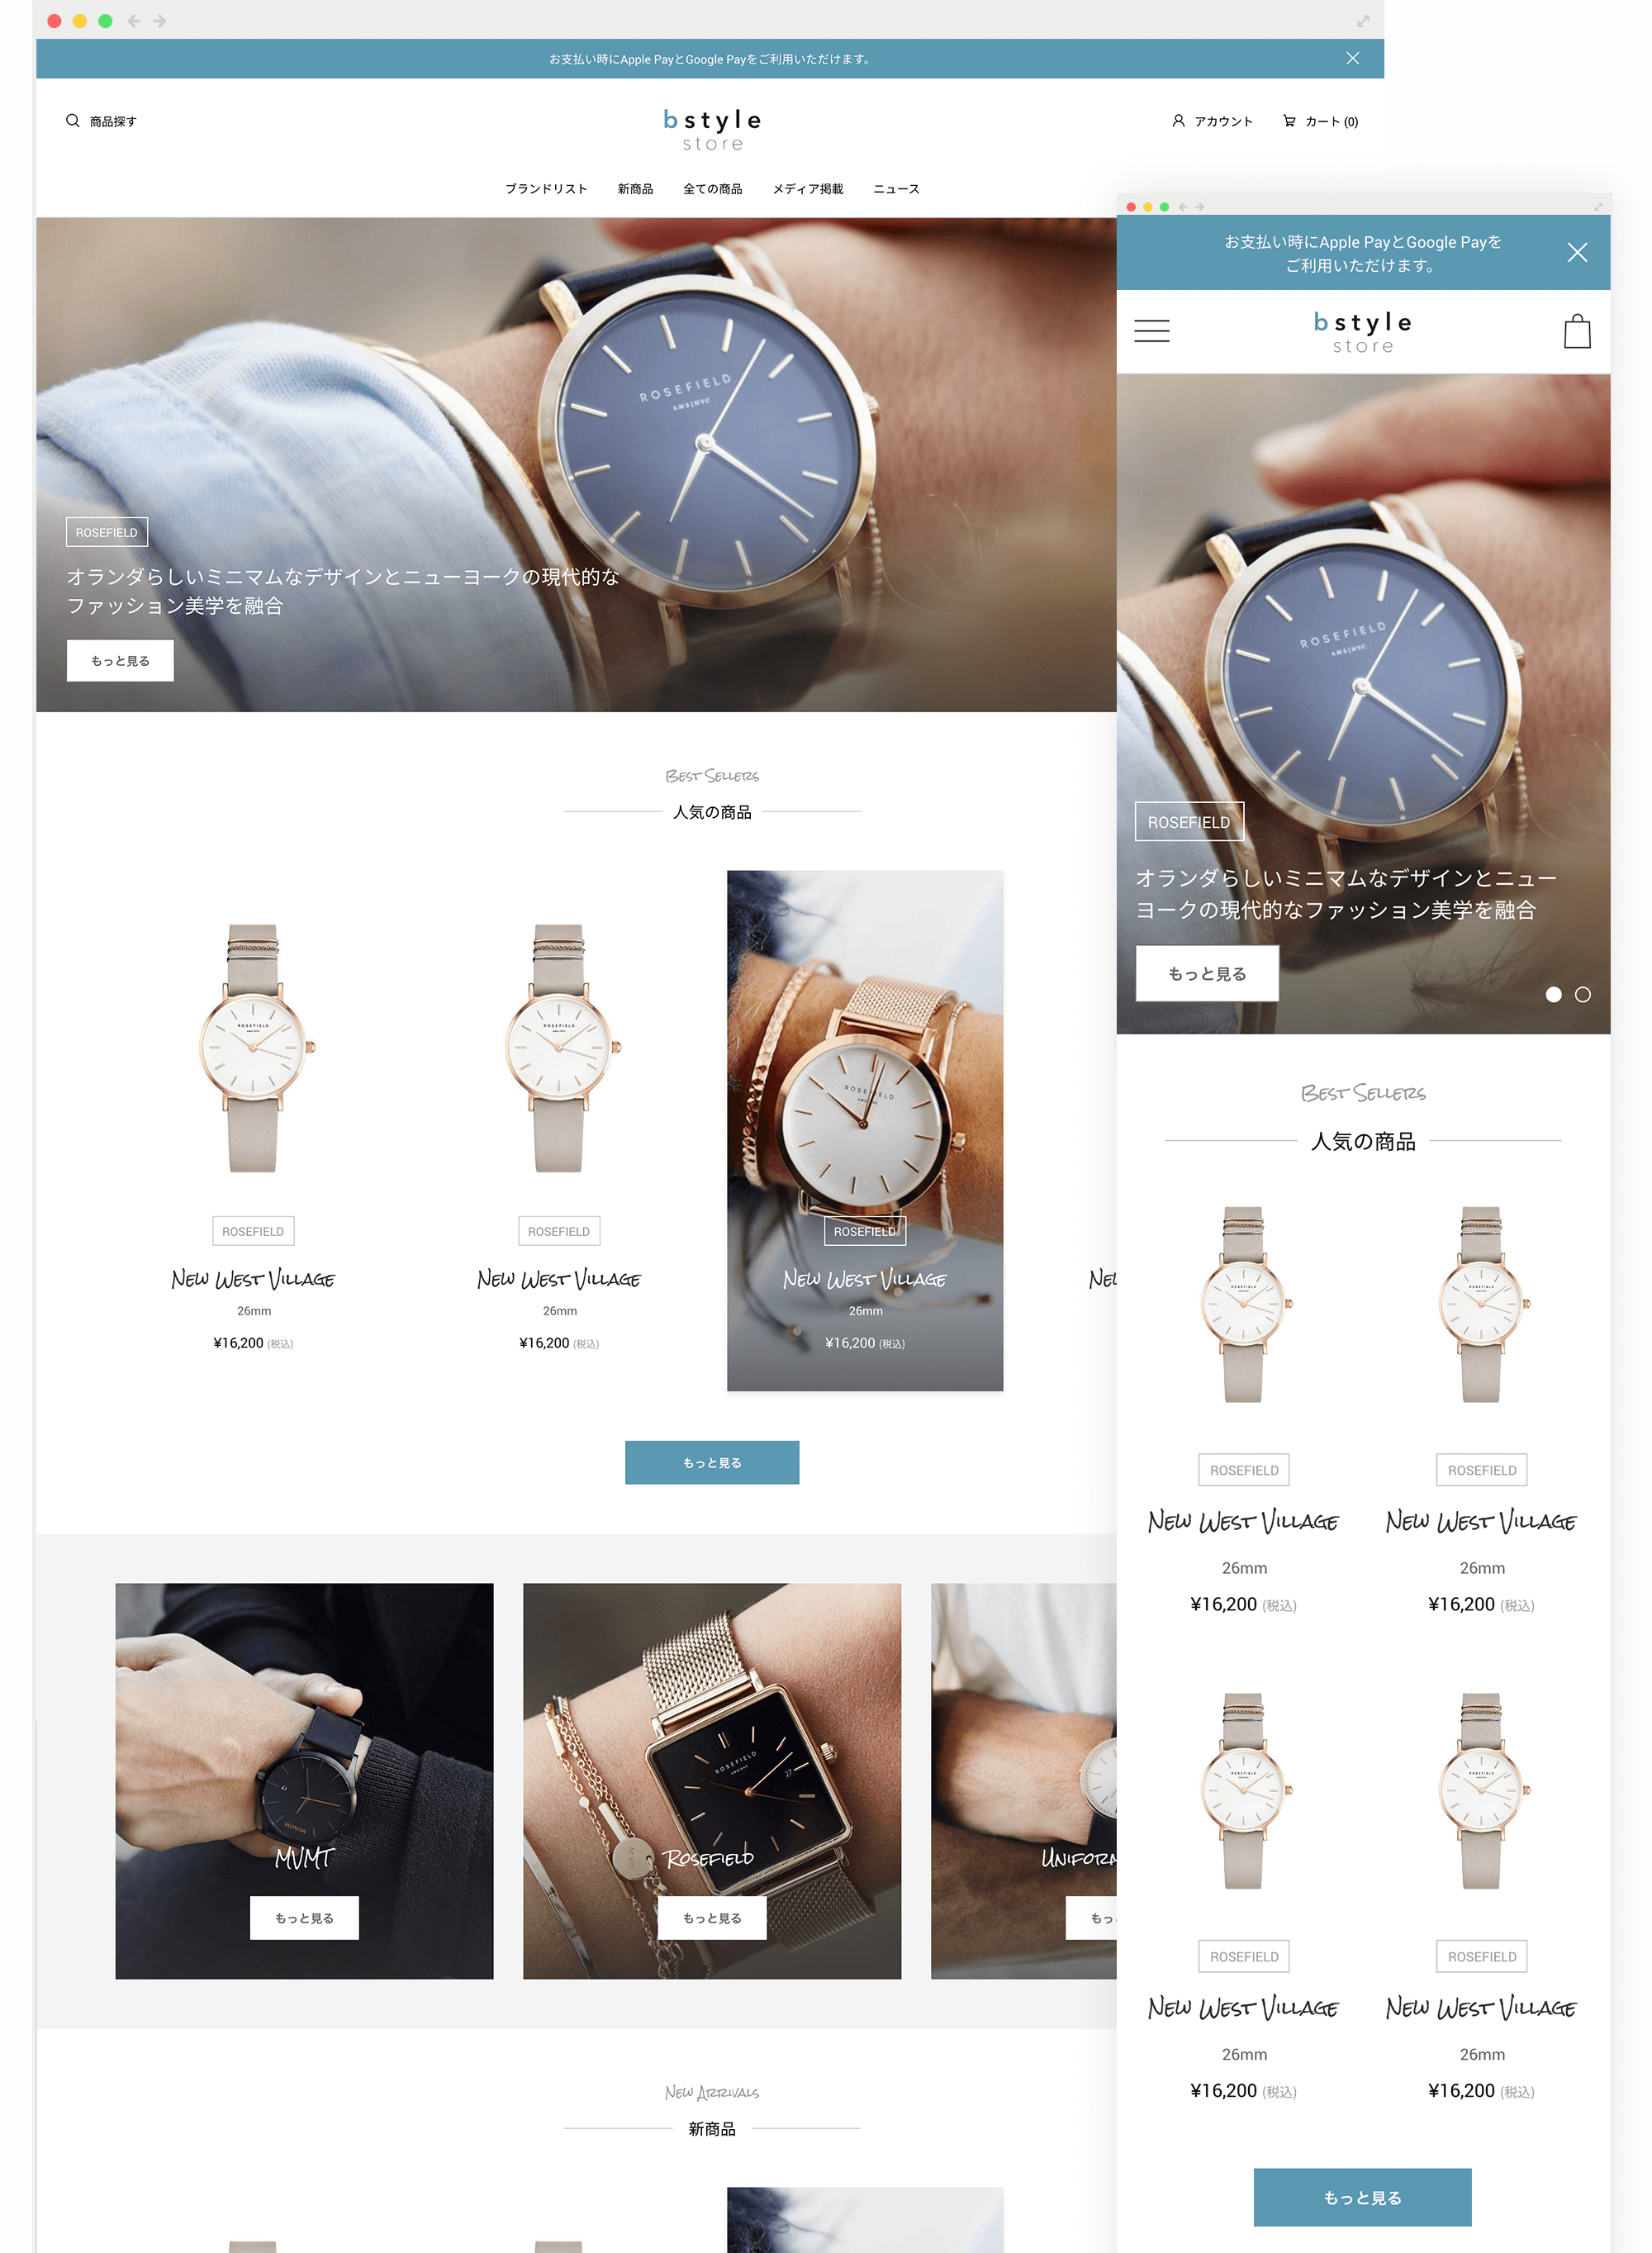 BStyle e-Commerce Shopify Responsive Homepage